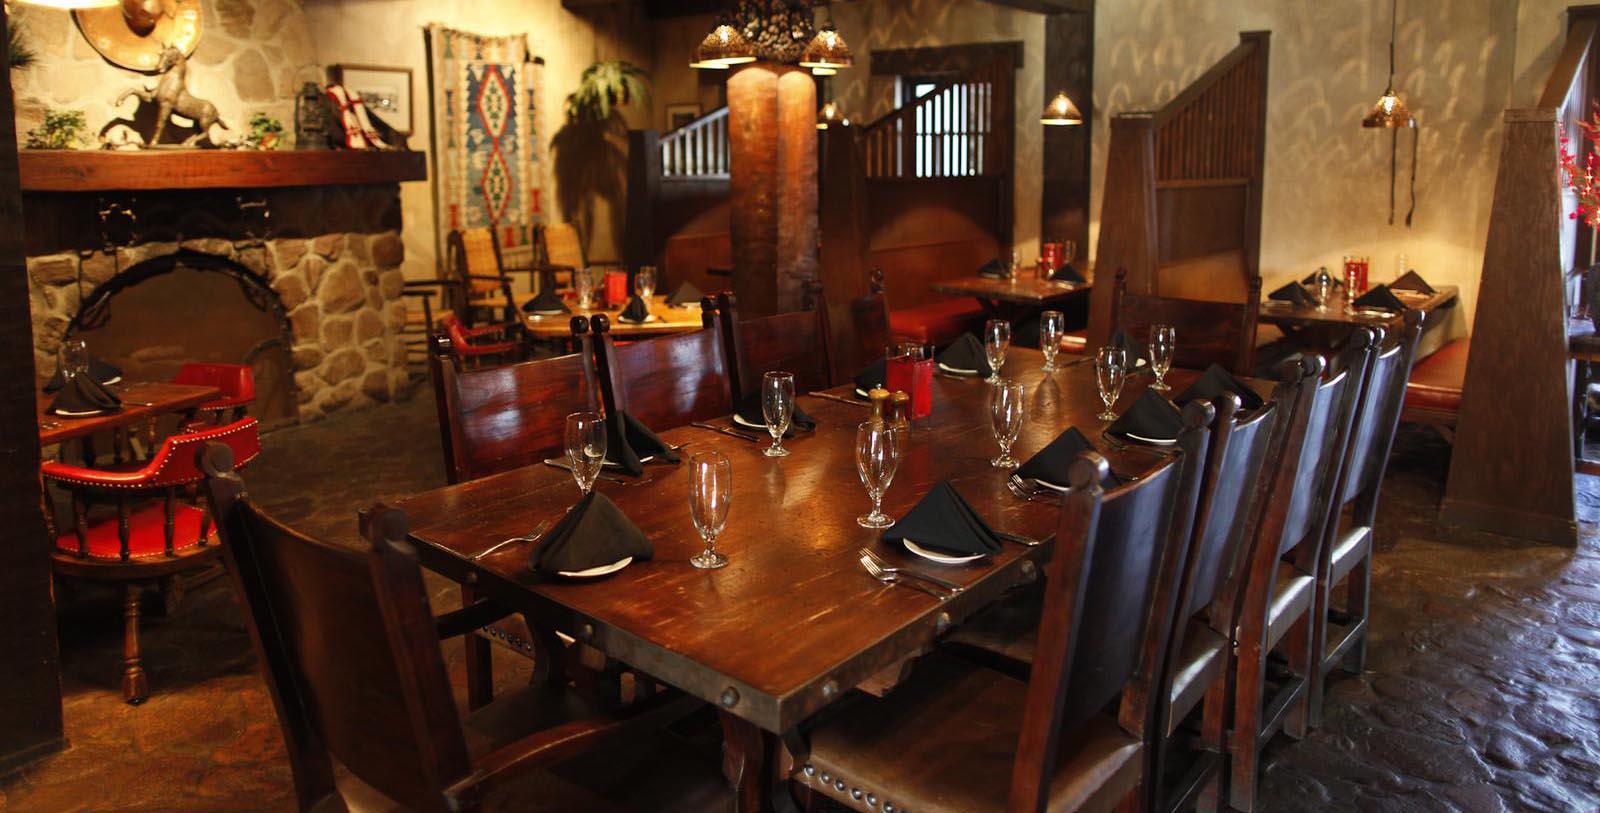 Taste the flavors of Southern Arizona at Stables Ranch Grille.